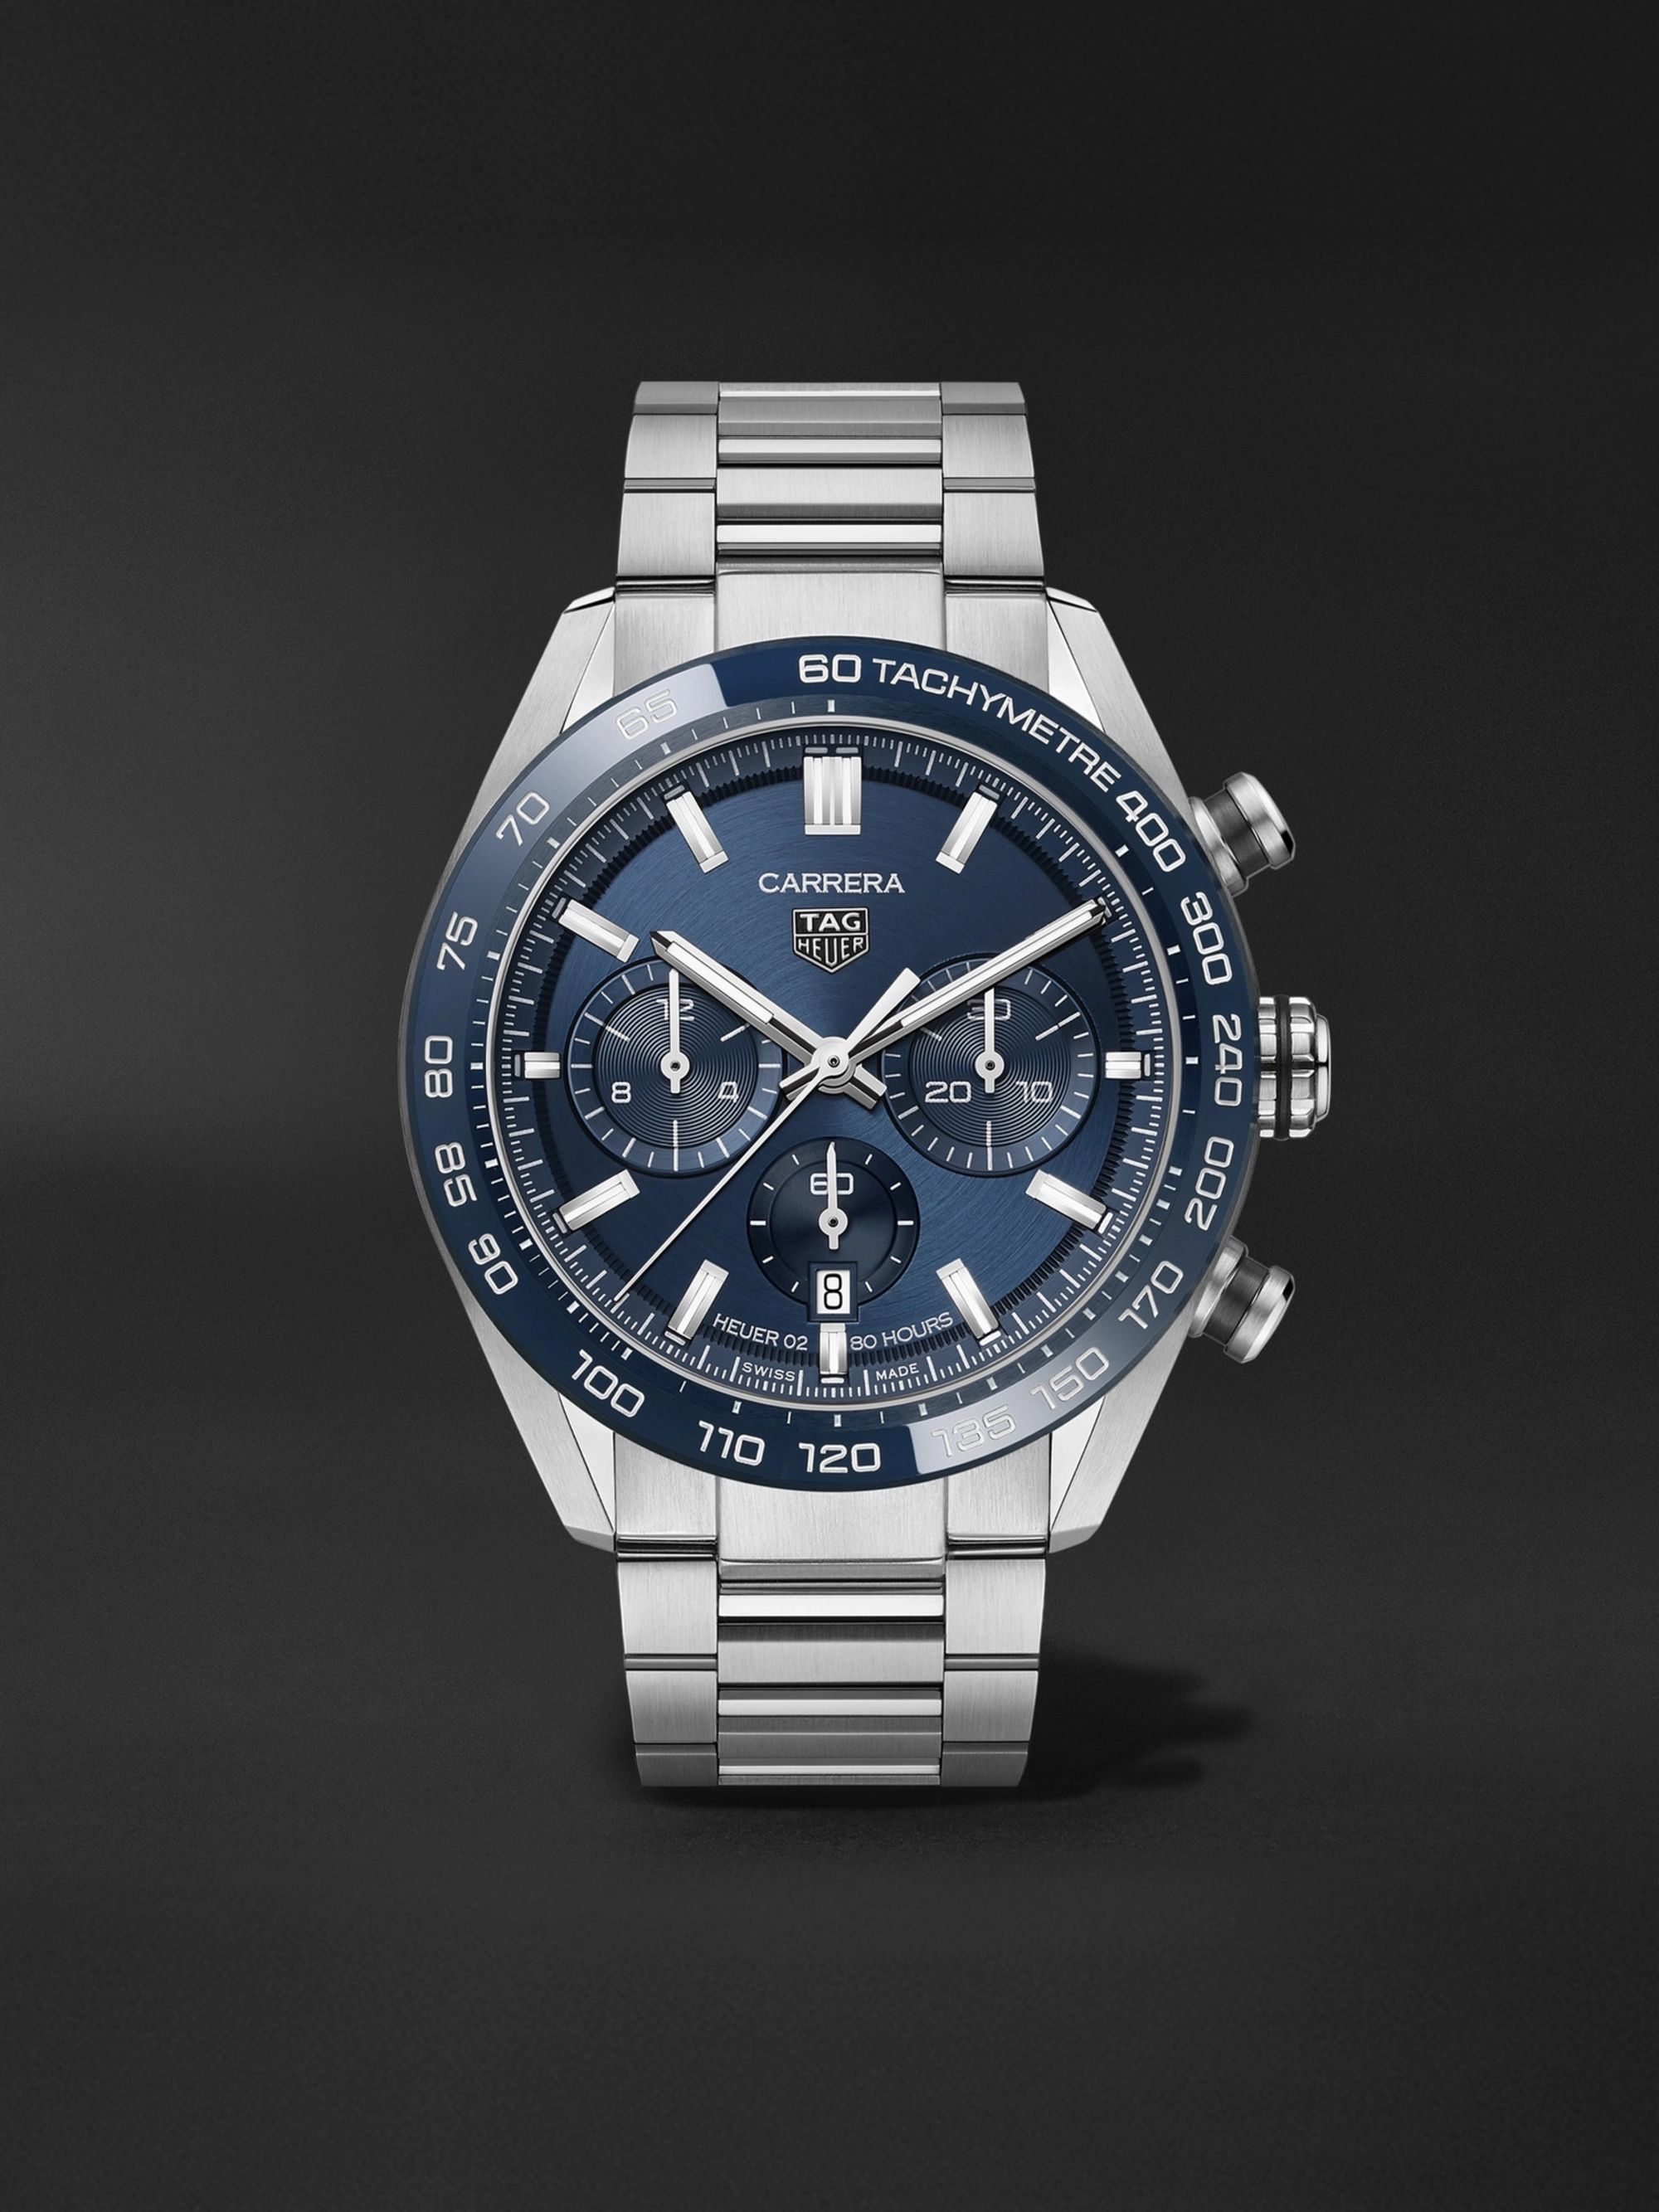 TAG HEUER Carrera Automatic Chronograph 44mm Stainless Steel Watch, Ref. No. CBN2A1A.BA643